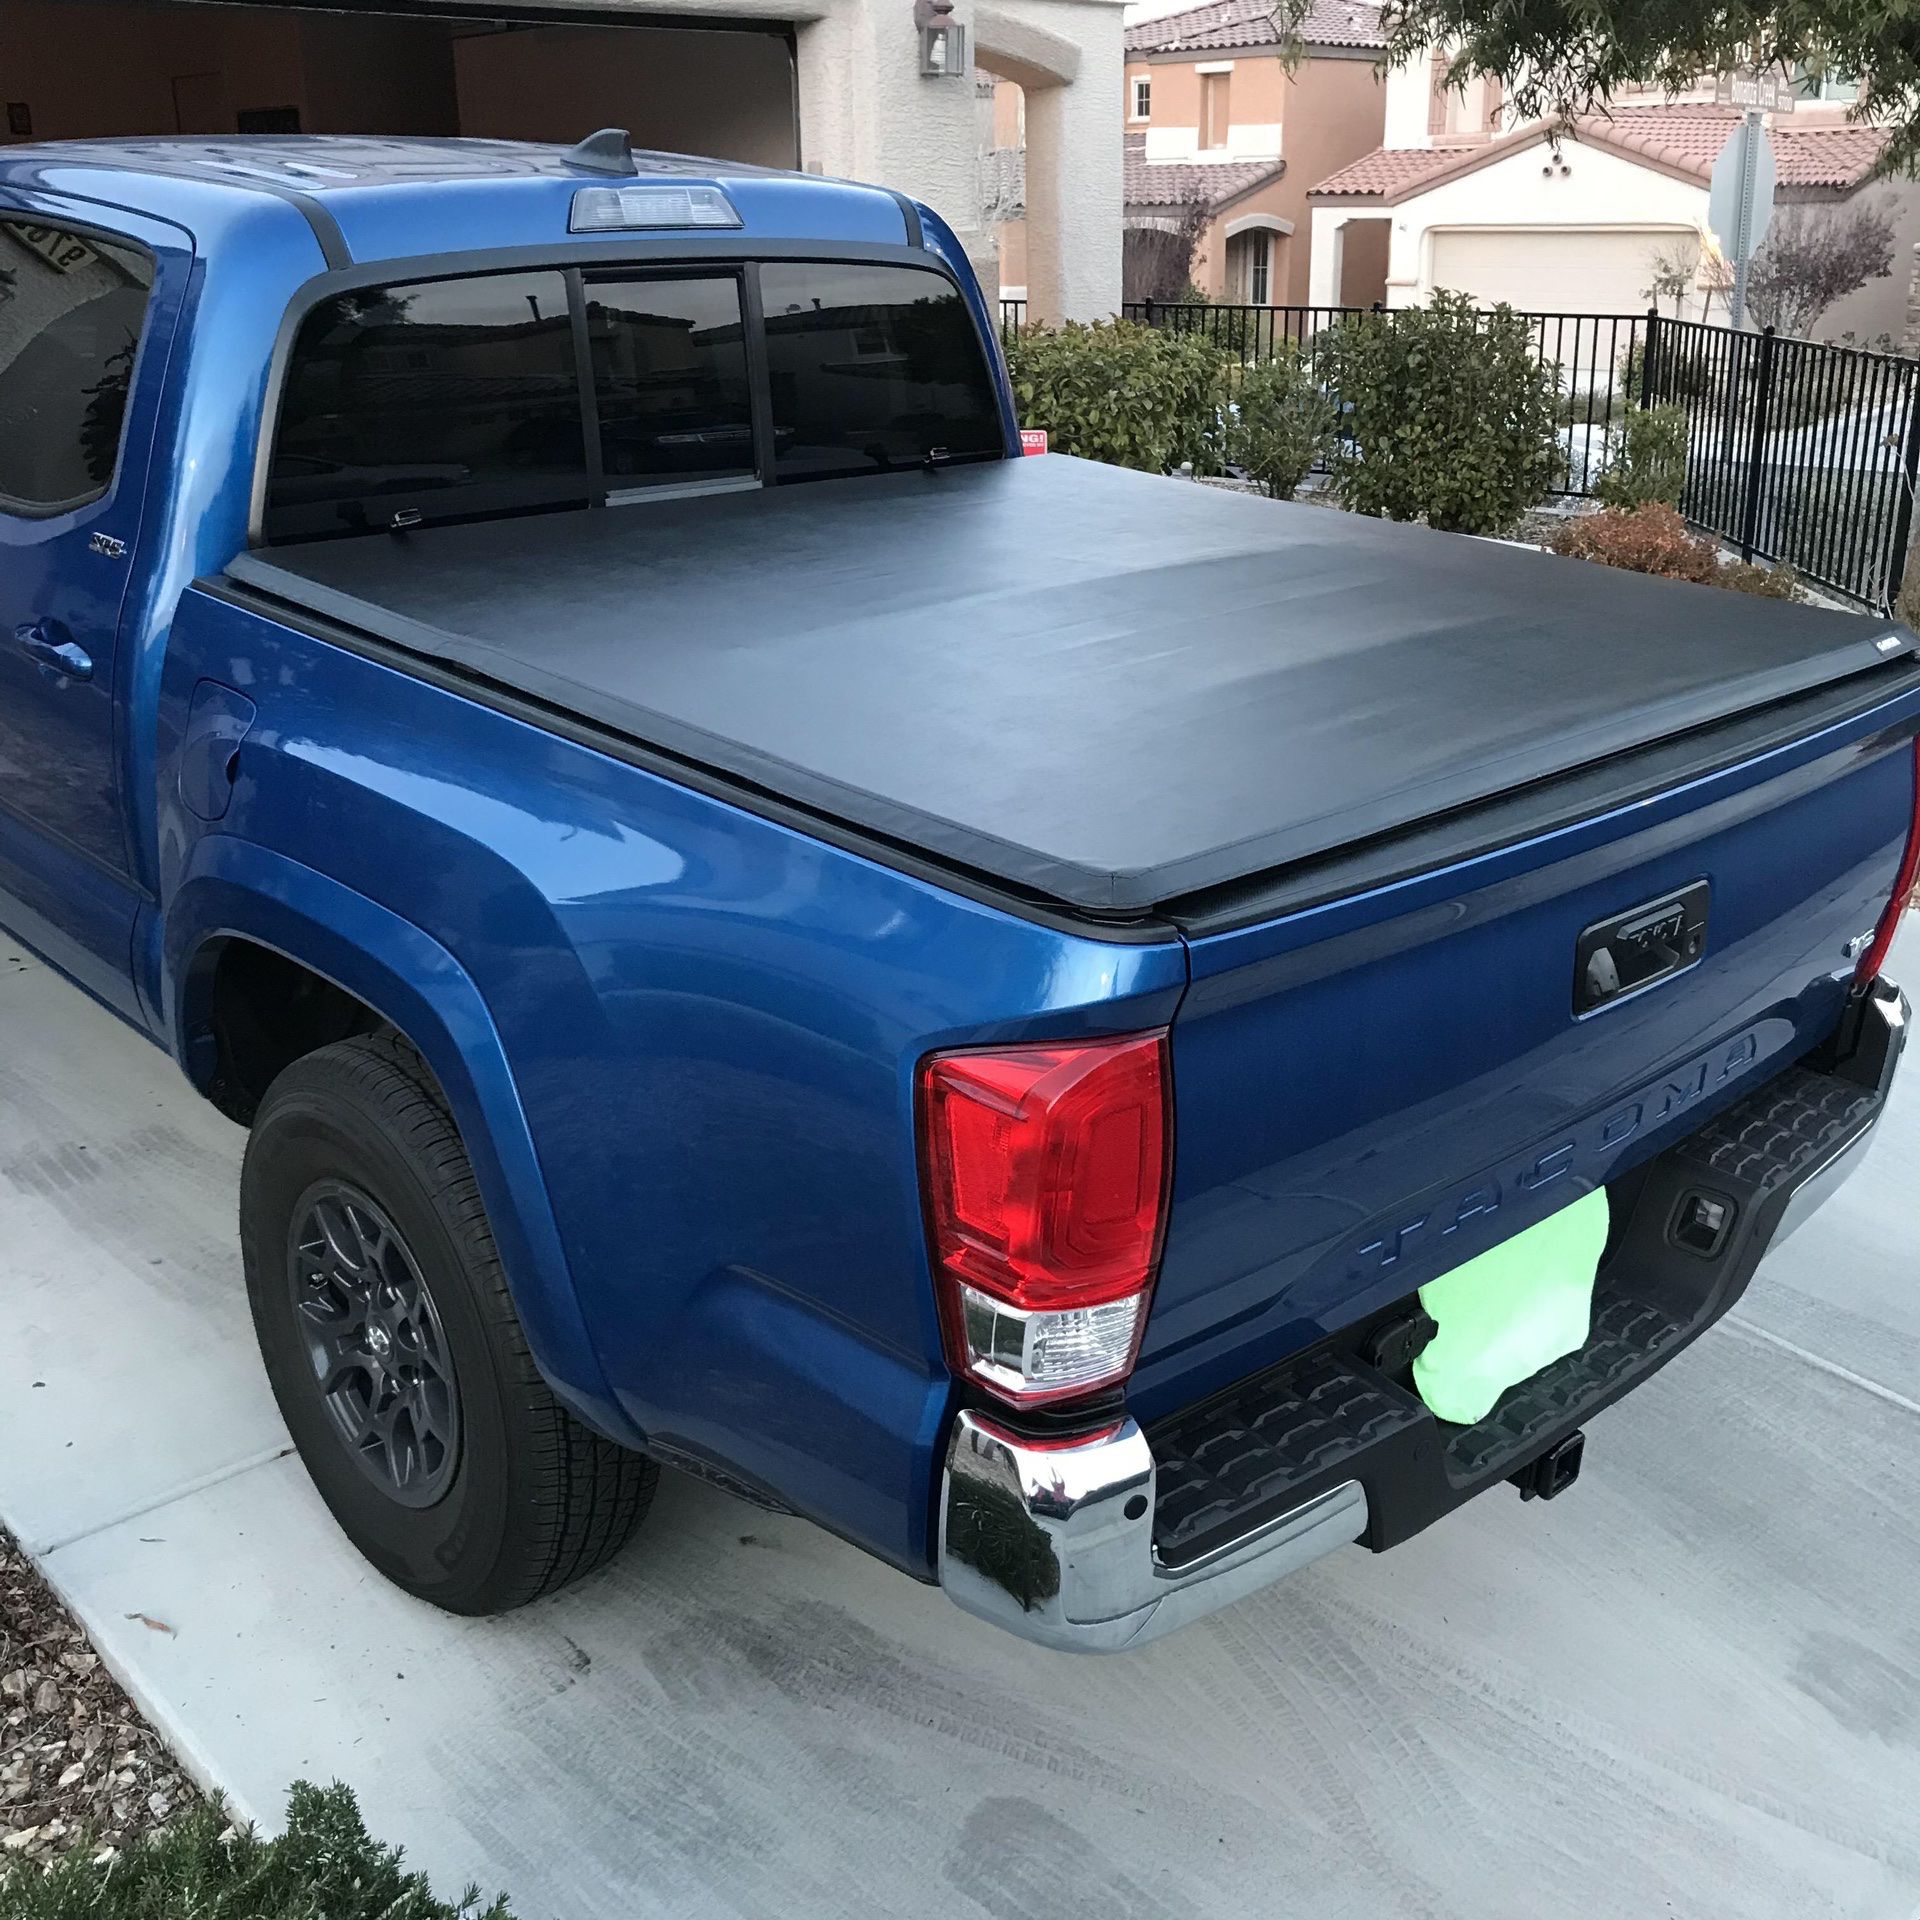 Gator Cover Tonneau Cover Used + Install 100$